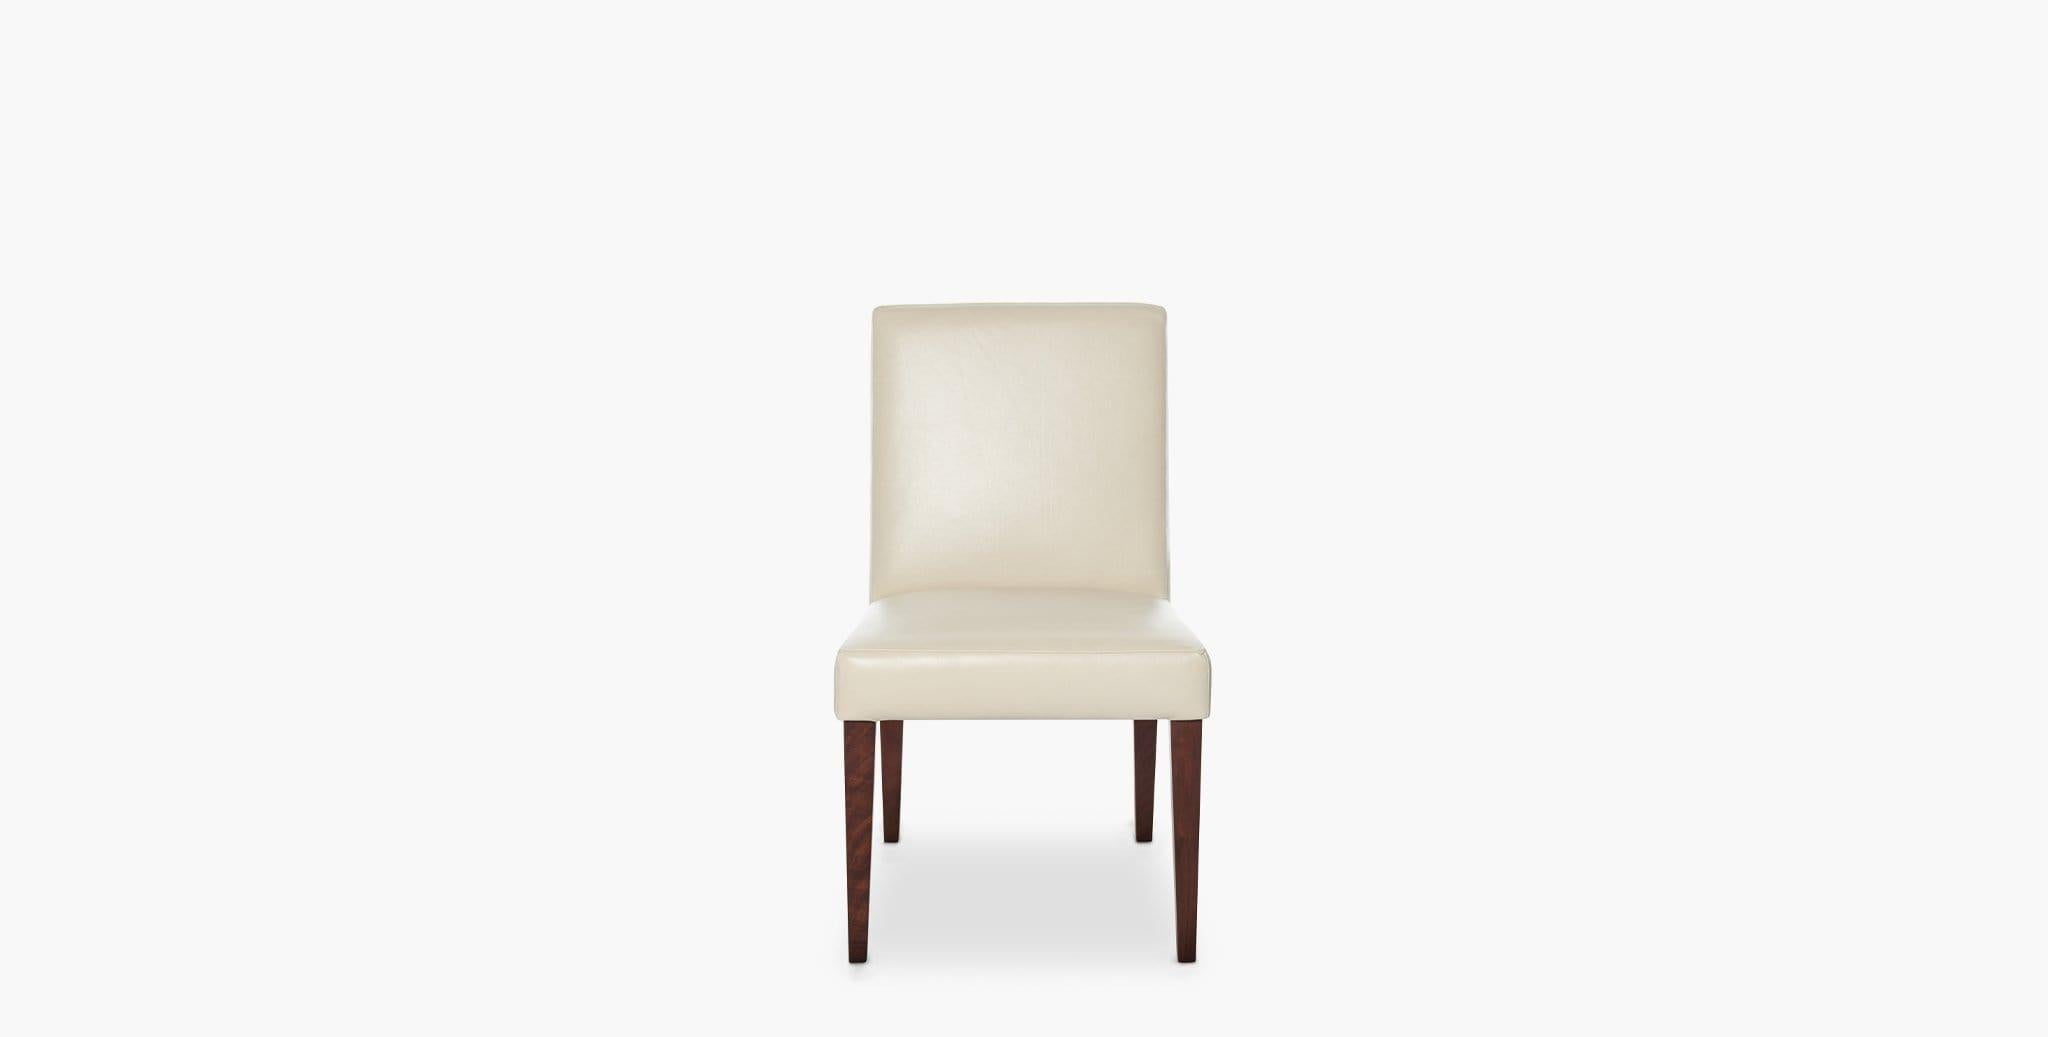 Our Hadley Dining Chair features a simple Silhouette coupled with an upholstered padded seat and back, making it the perfect addition for dining, desk or vanity seating. Our handcrafted fabrics, leathers, and finishes are inspired by the natural